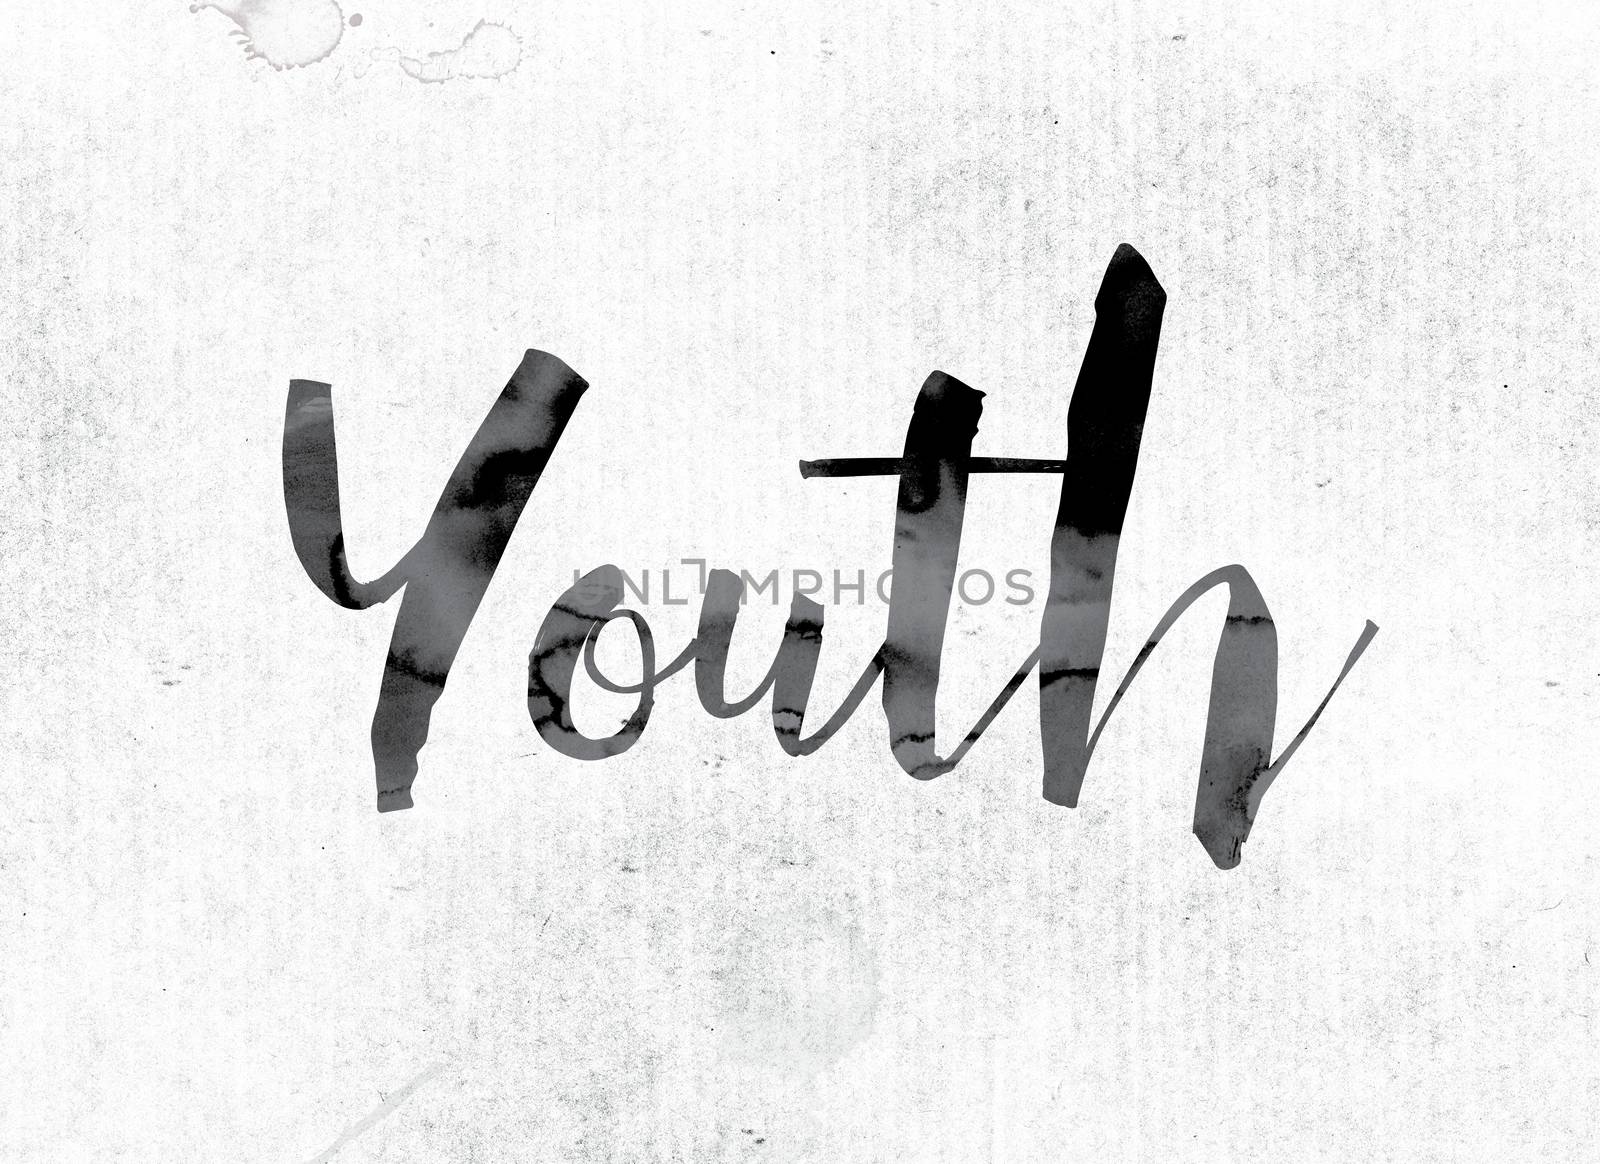 The word "Youth" concept and theme painted in watercolor ink on a white paper.